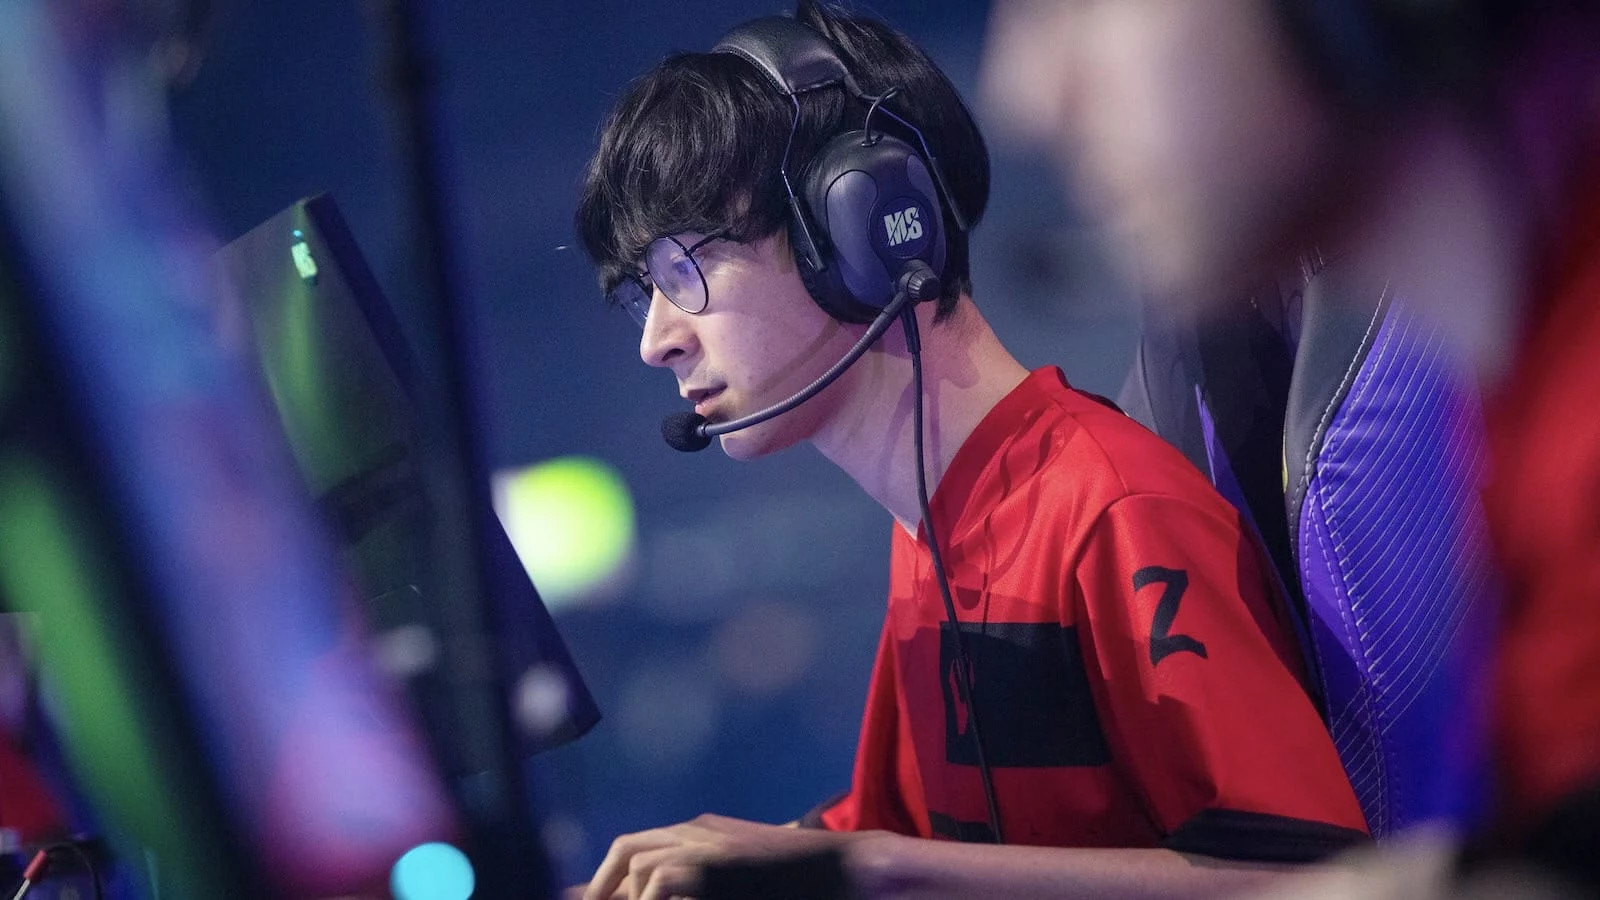 Sentinels in peril with TenZ likely forced to play in VCT despite hand injury – Egaxo